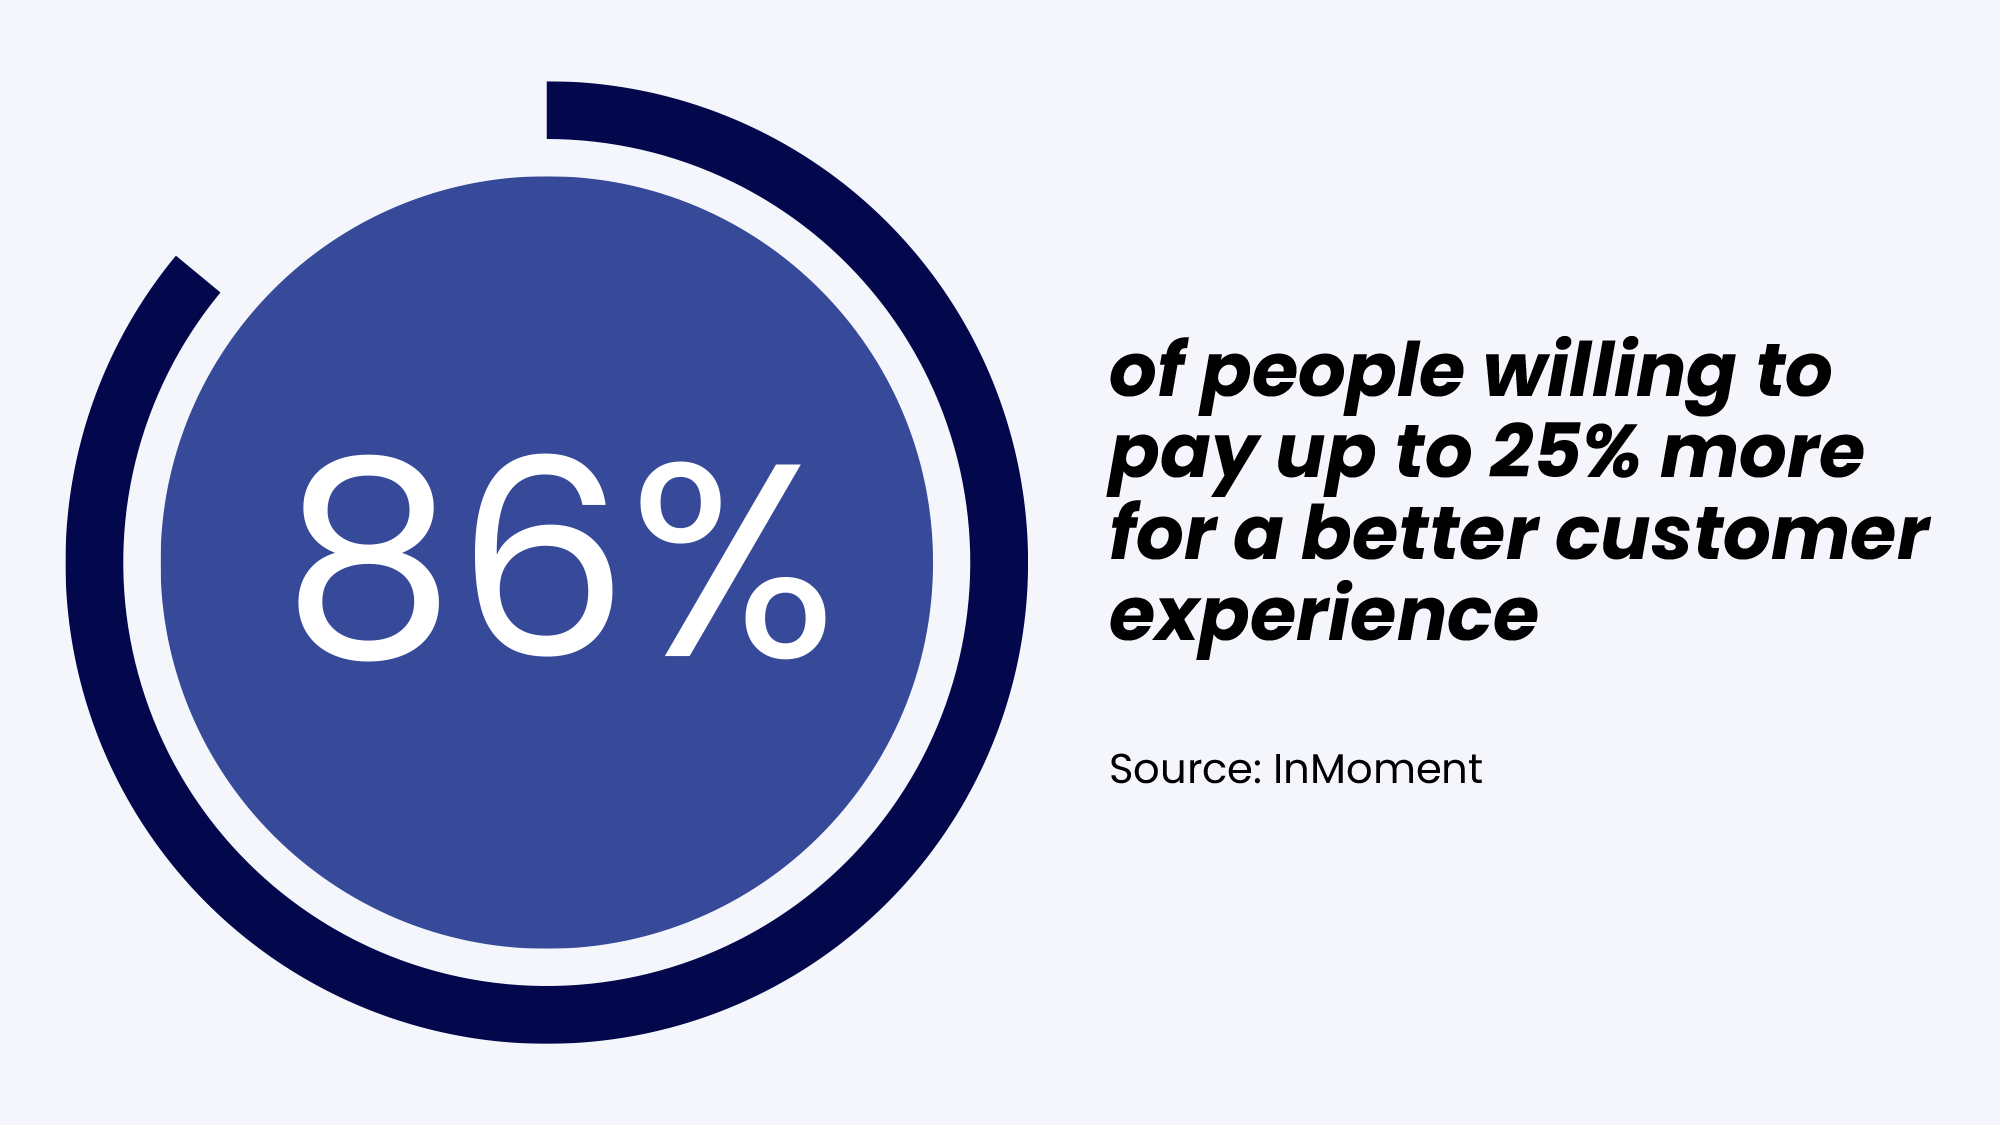 86% of people willing to pay up to 25% more for a better customer experience